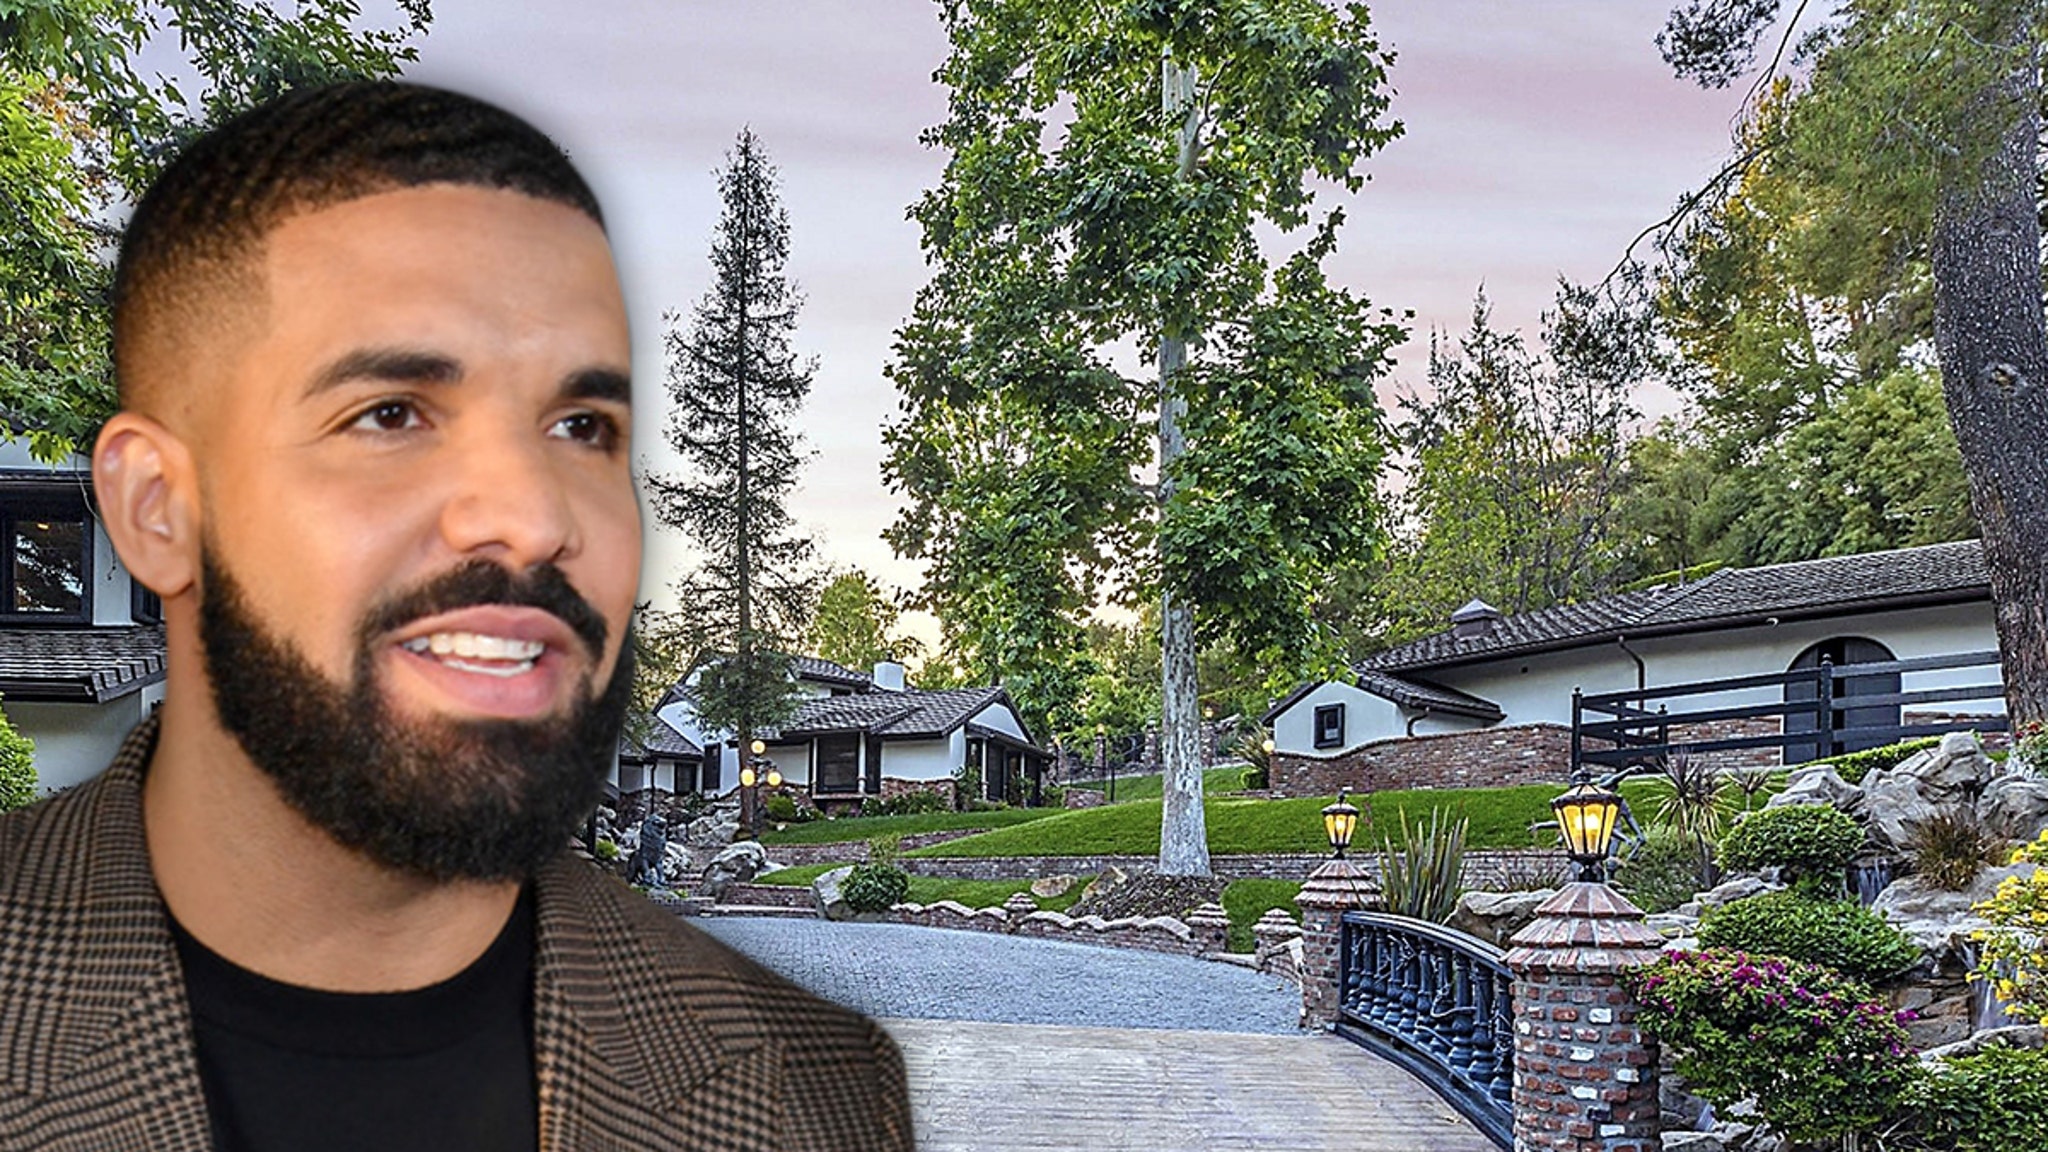 Drake’s YOLO Estate Will Be Torn Down if Real Estate Developers Buy it